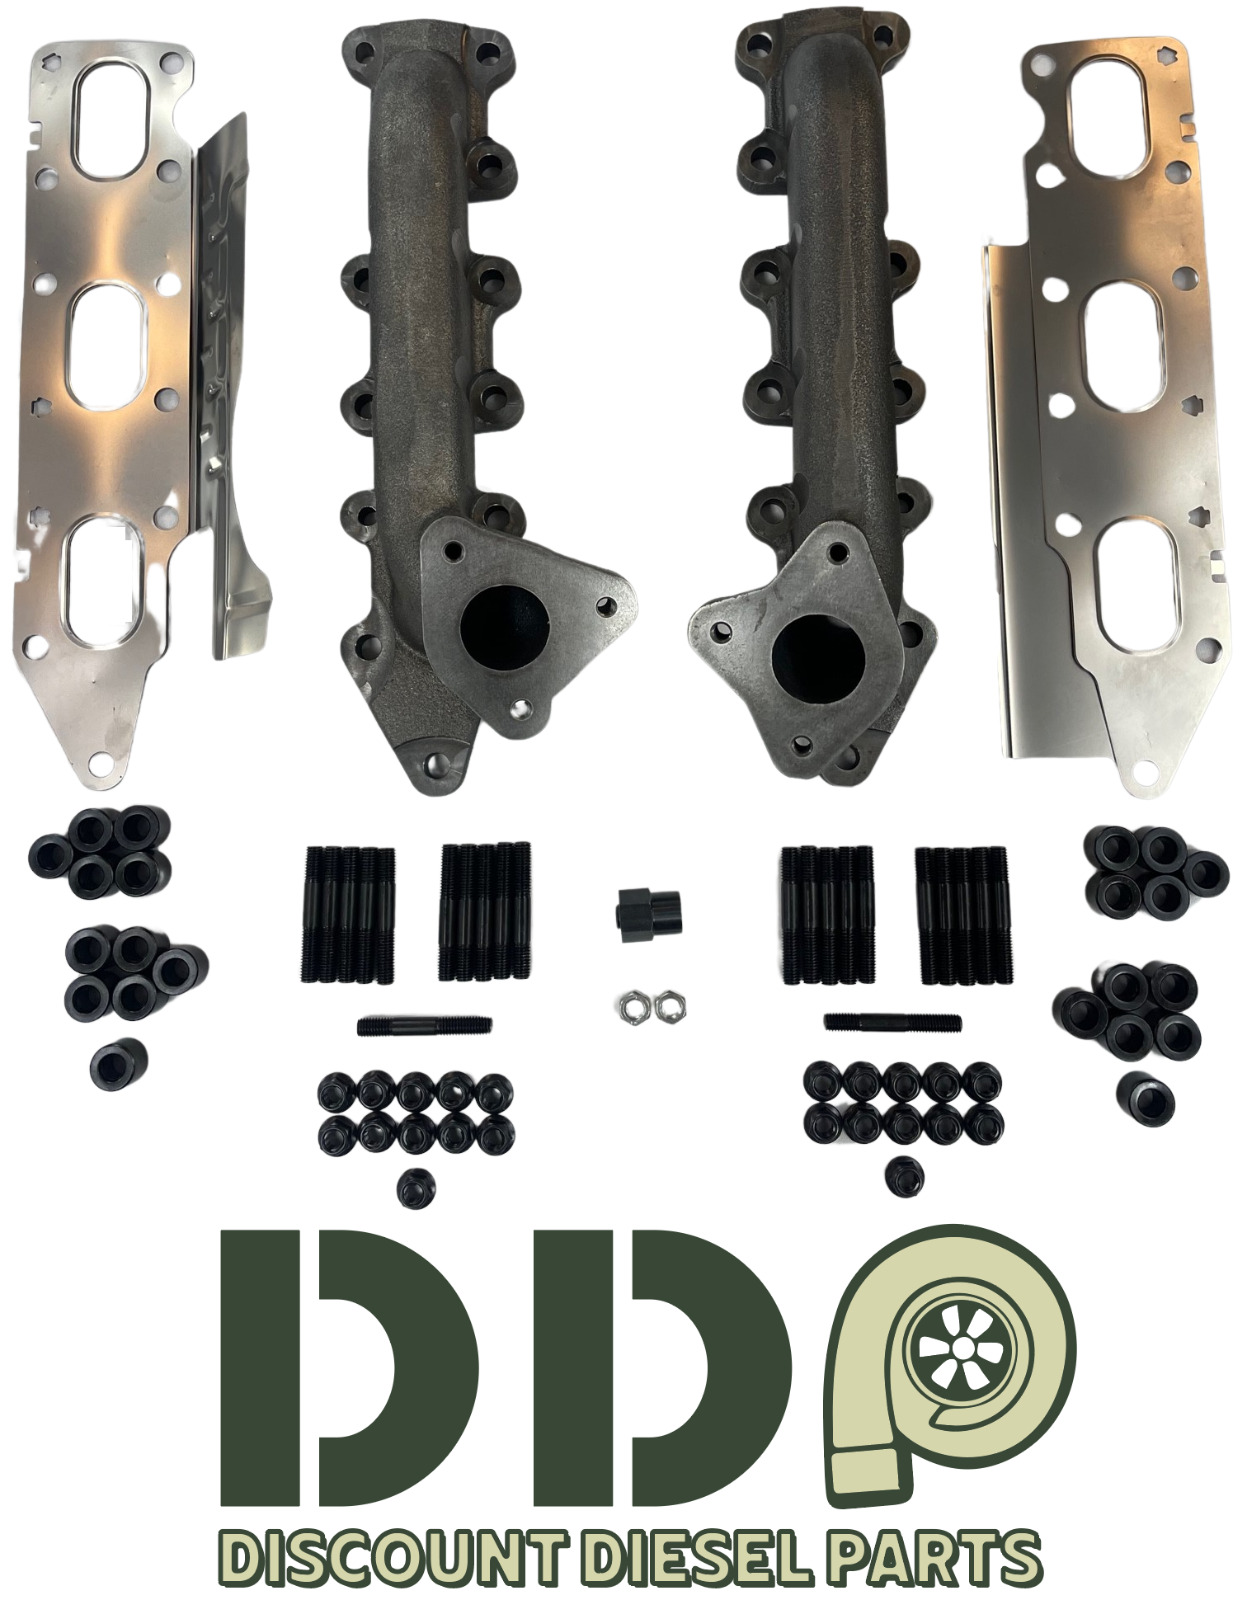 Diesel Power Exhaust Manifold Kit For 11-16 Ford F-150/ Expedition 3.5L Ecoboost